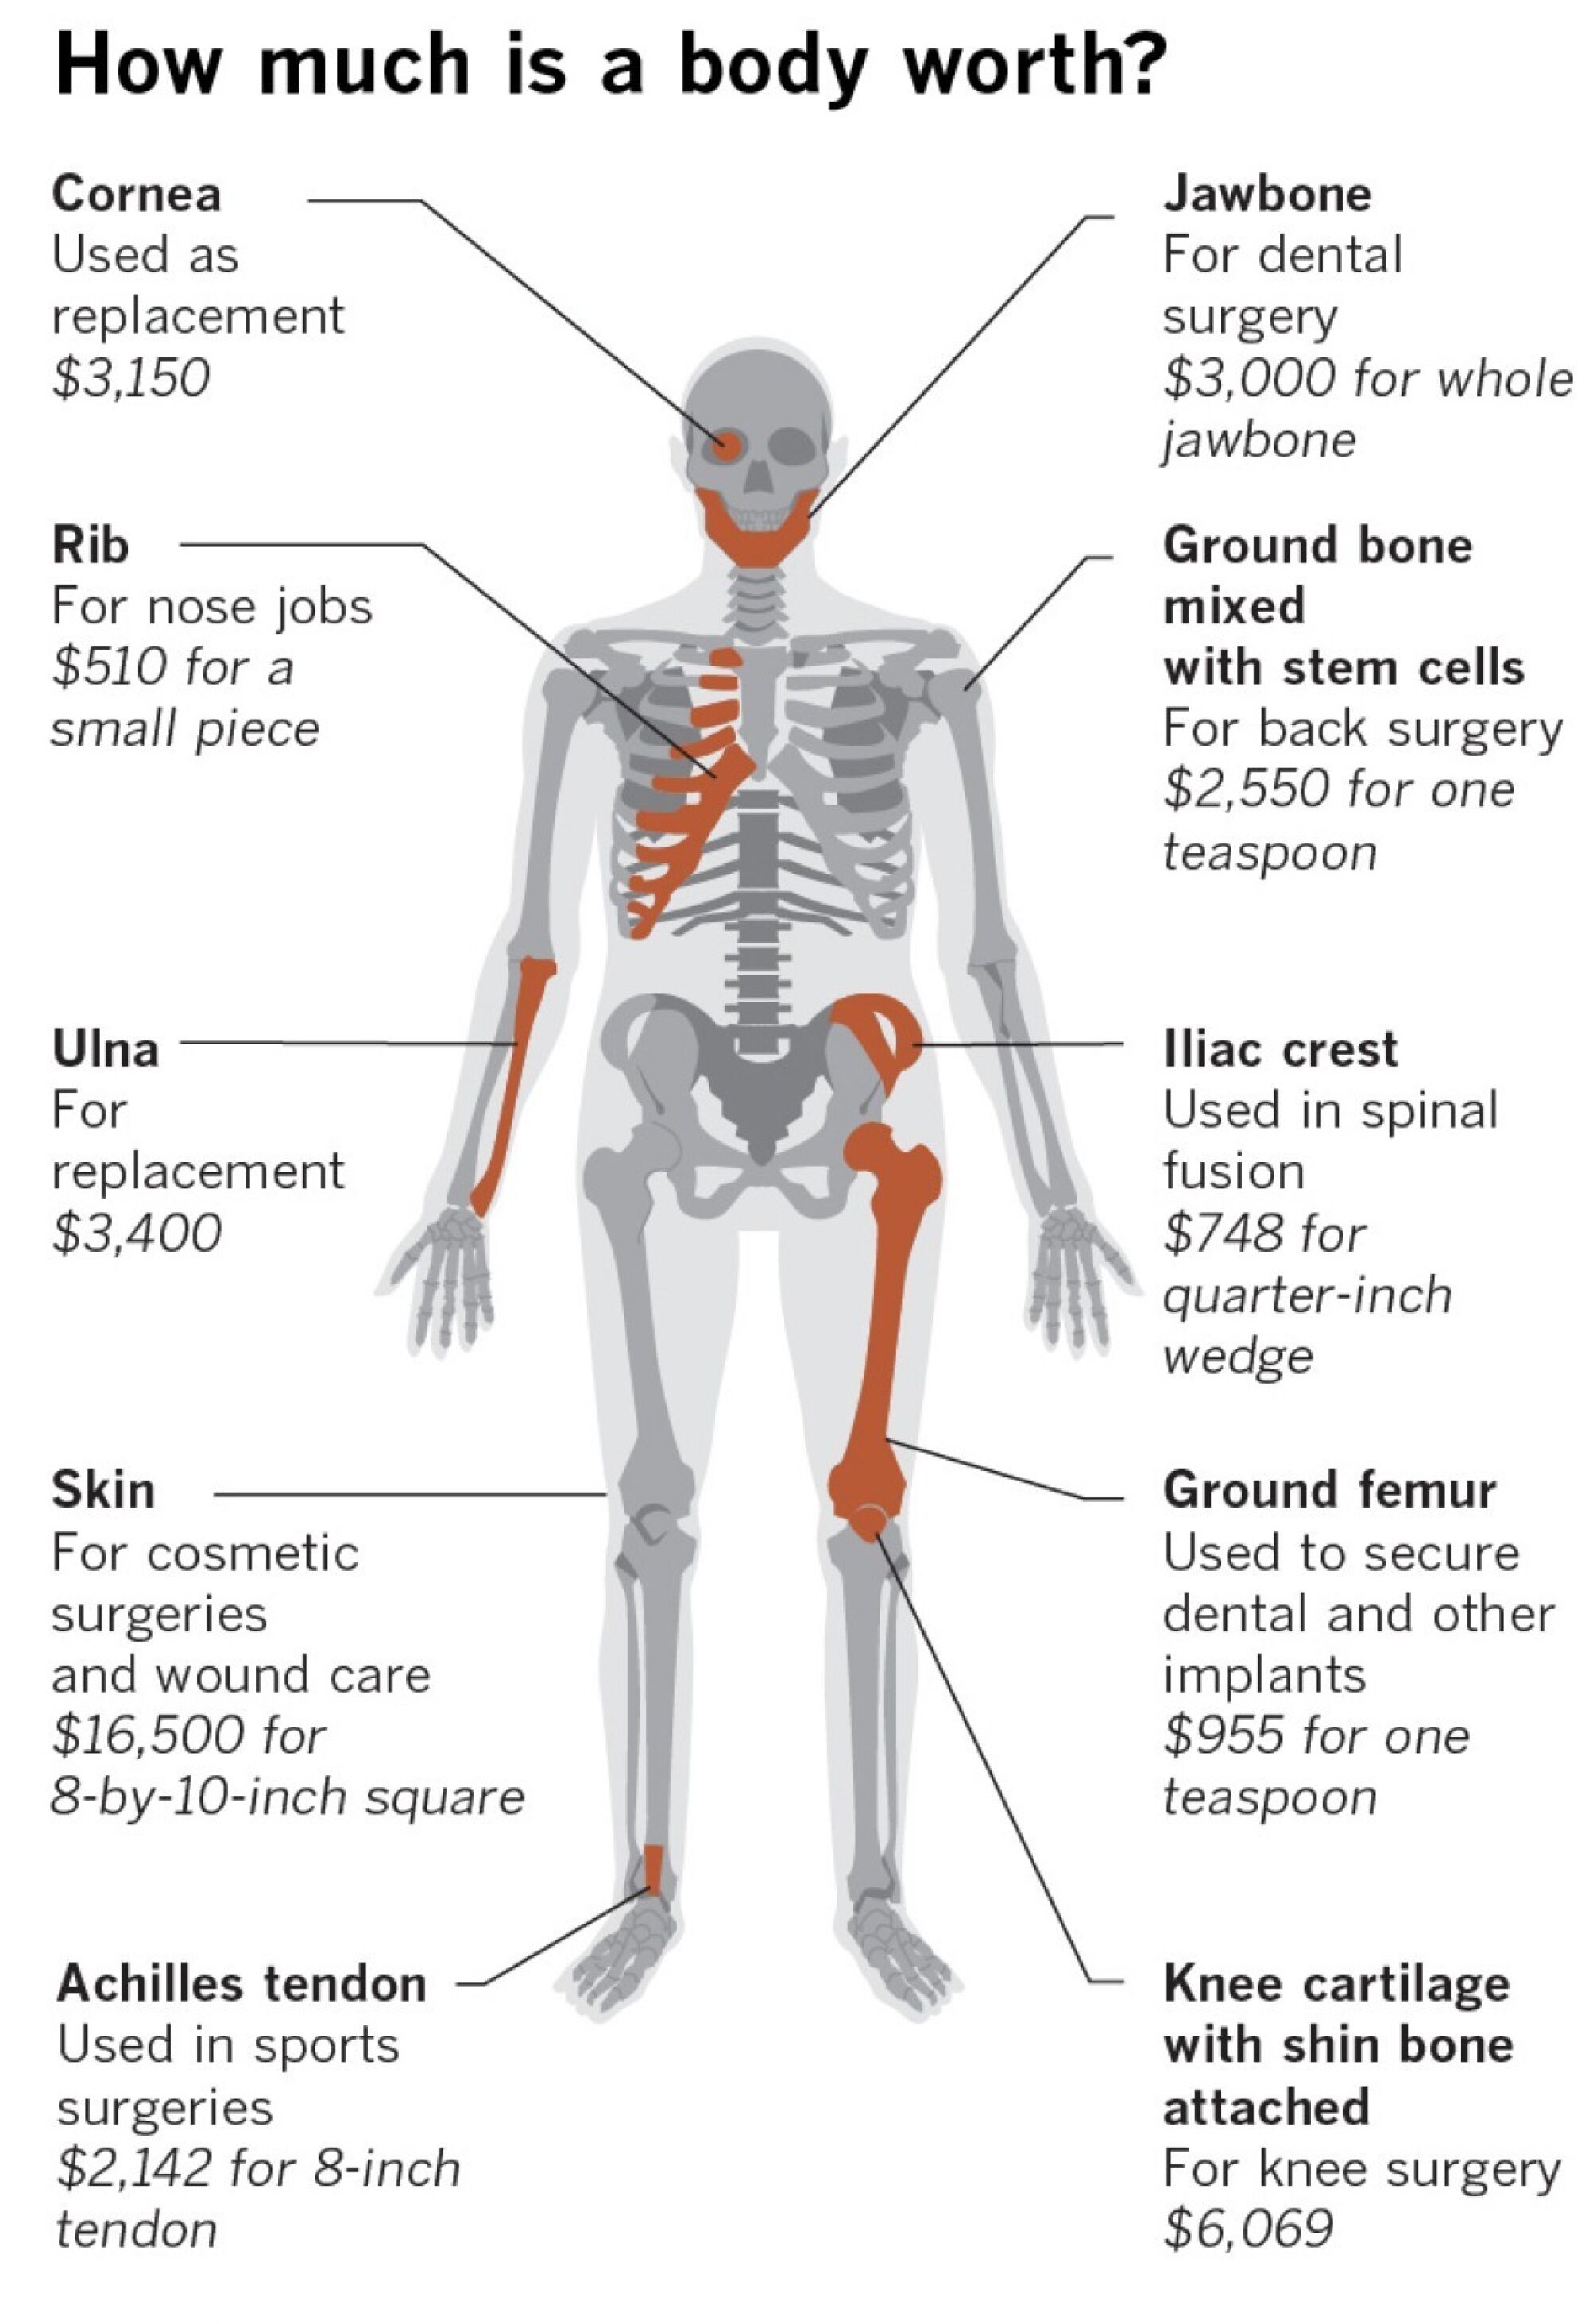 A human body can supply skin, bone and other tissues for medical products that biotech firms sell for hundreds of thousands of dollars to doctors and hospitals. Here are prices The Times found in a review of invoices received by hospitals. (A previous version of this illustration was sourced to Lifesharing. That organization was the source of the original image but not pricing data. Lifesharing does not sell body-tissue products.) Source: Times reporting